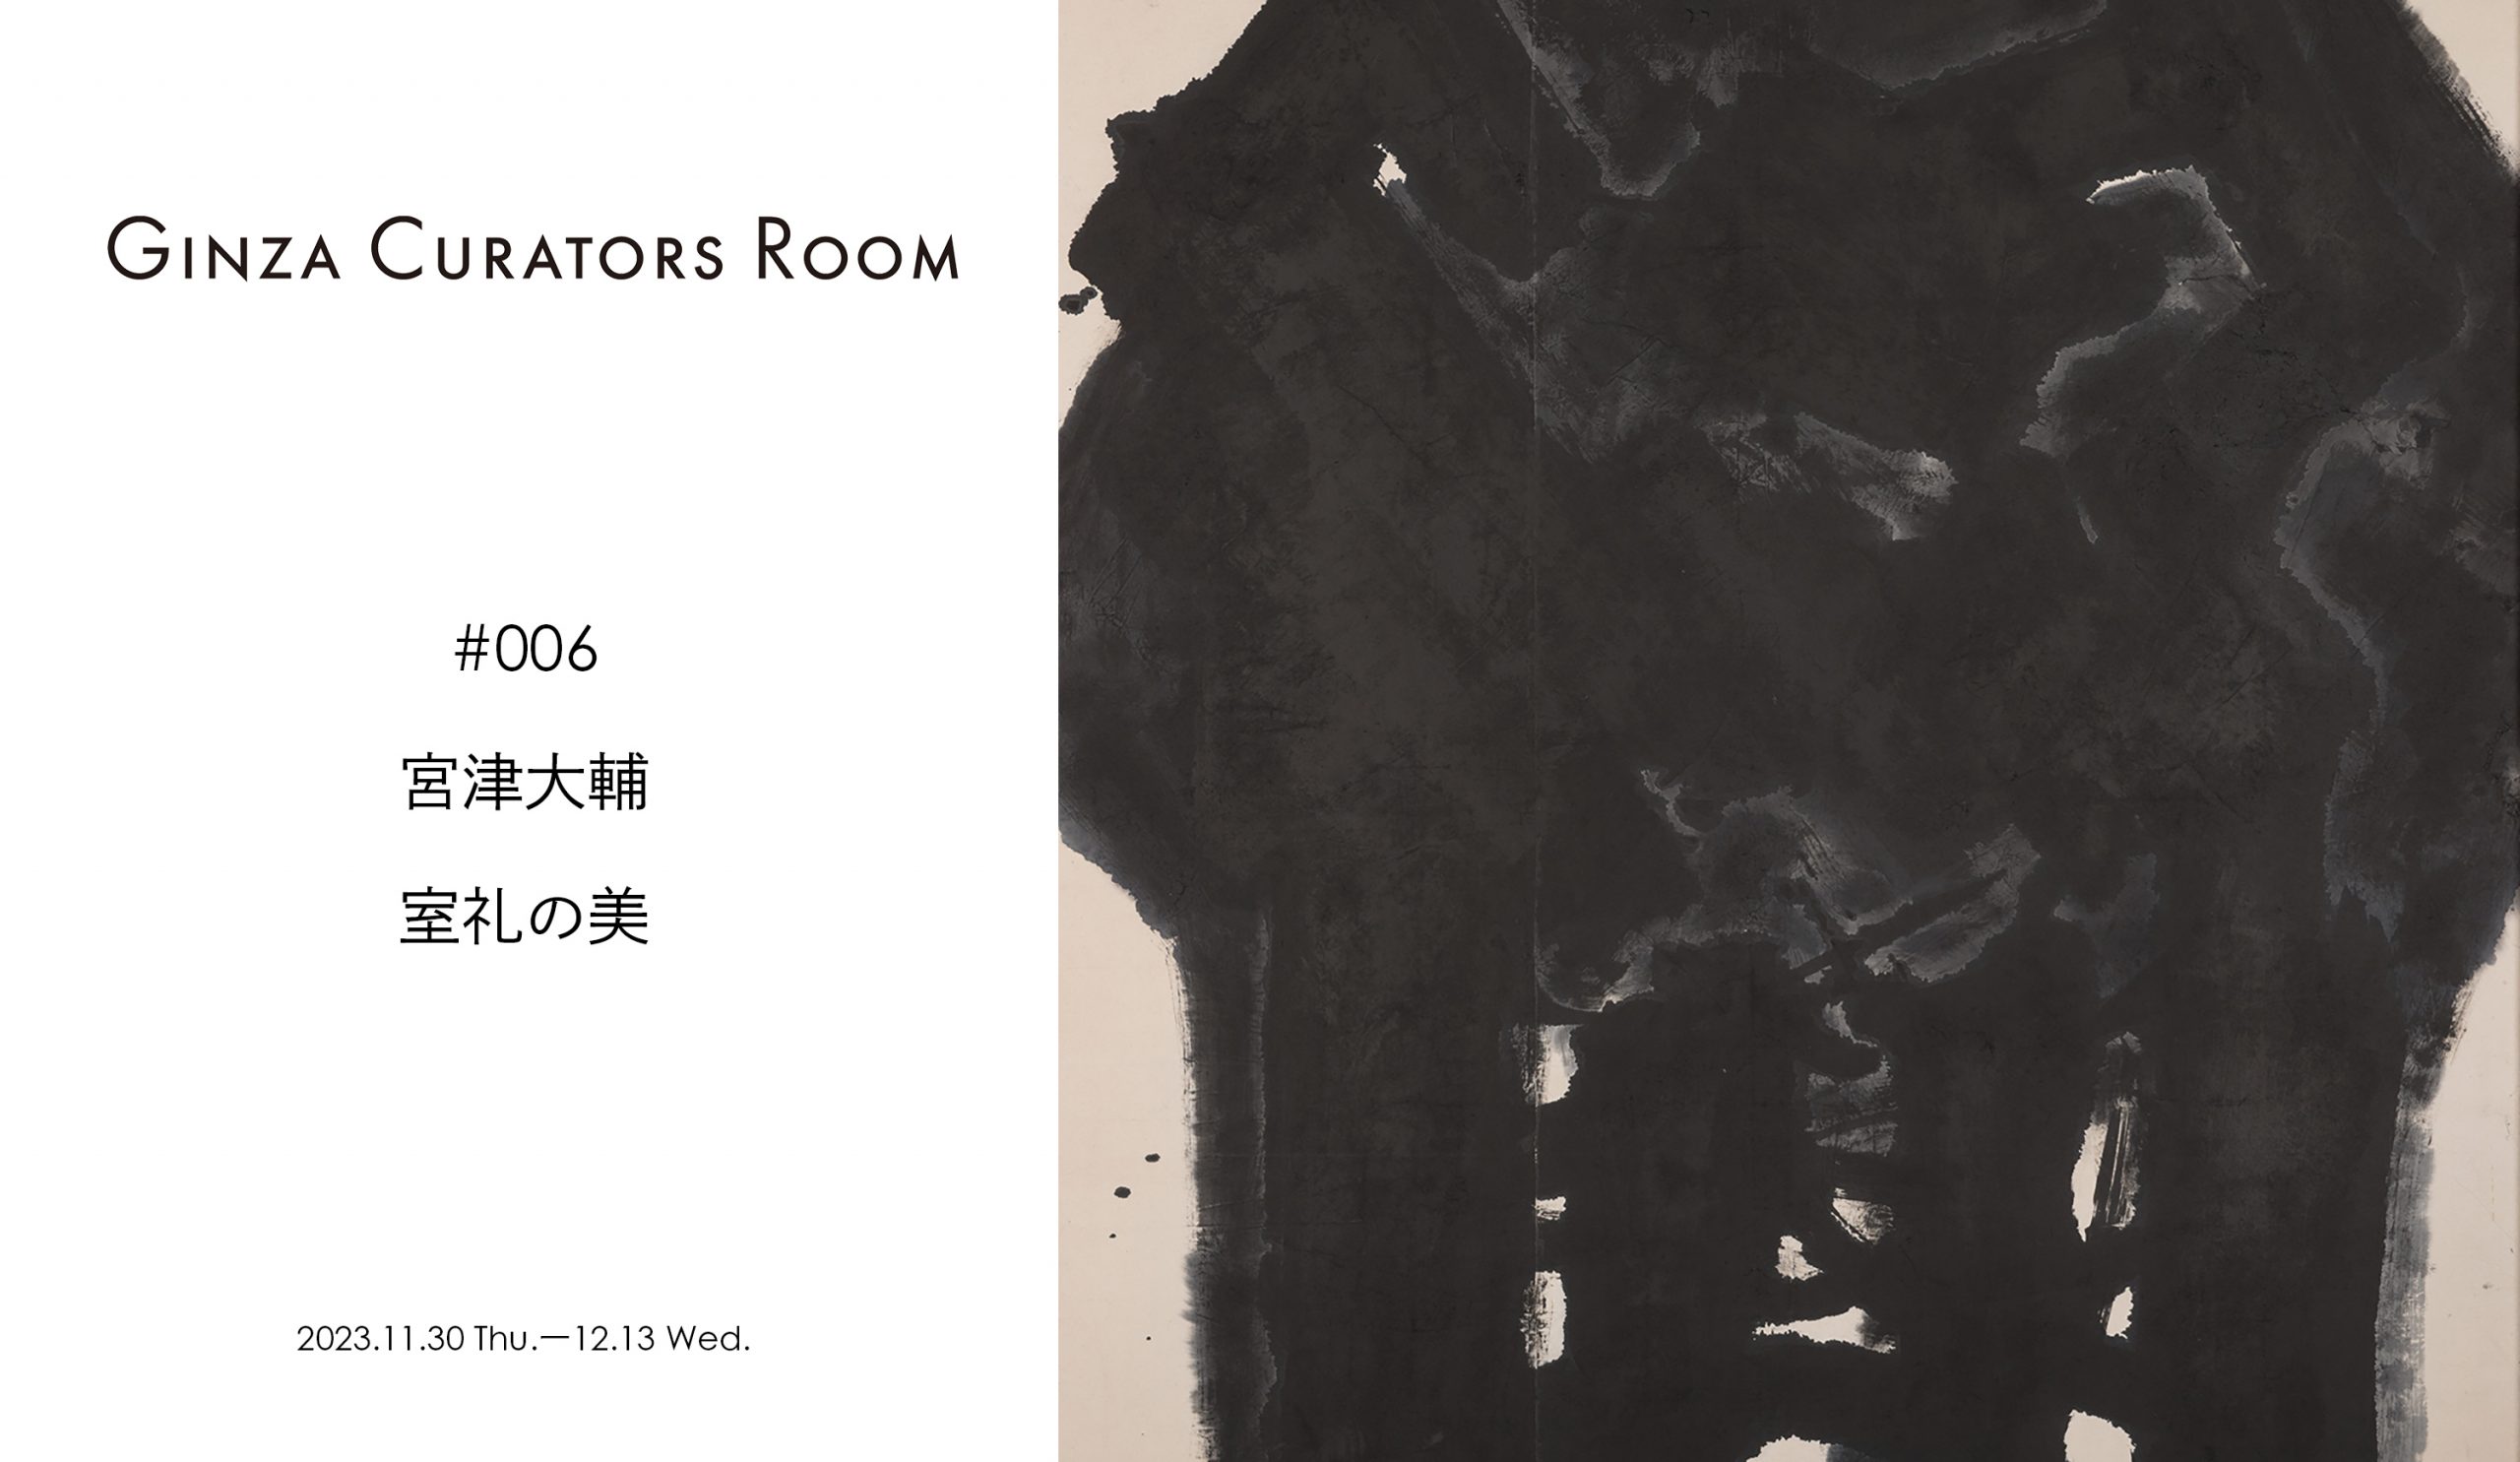 Ginza Curator’s Room #006 『室礼の美』